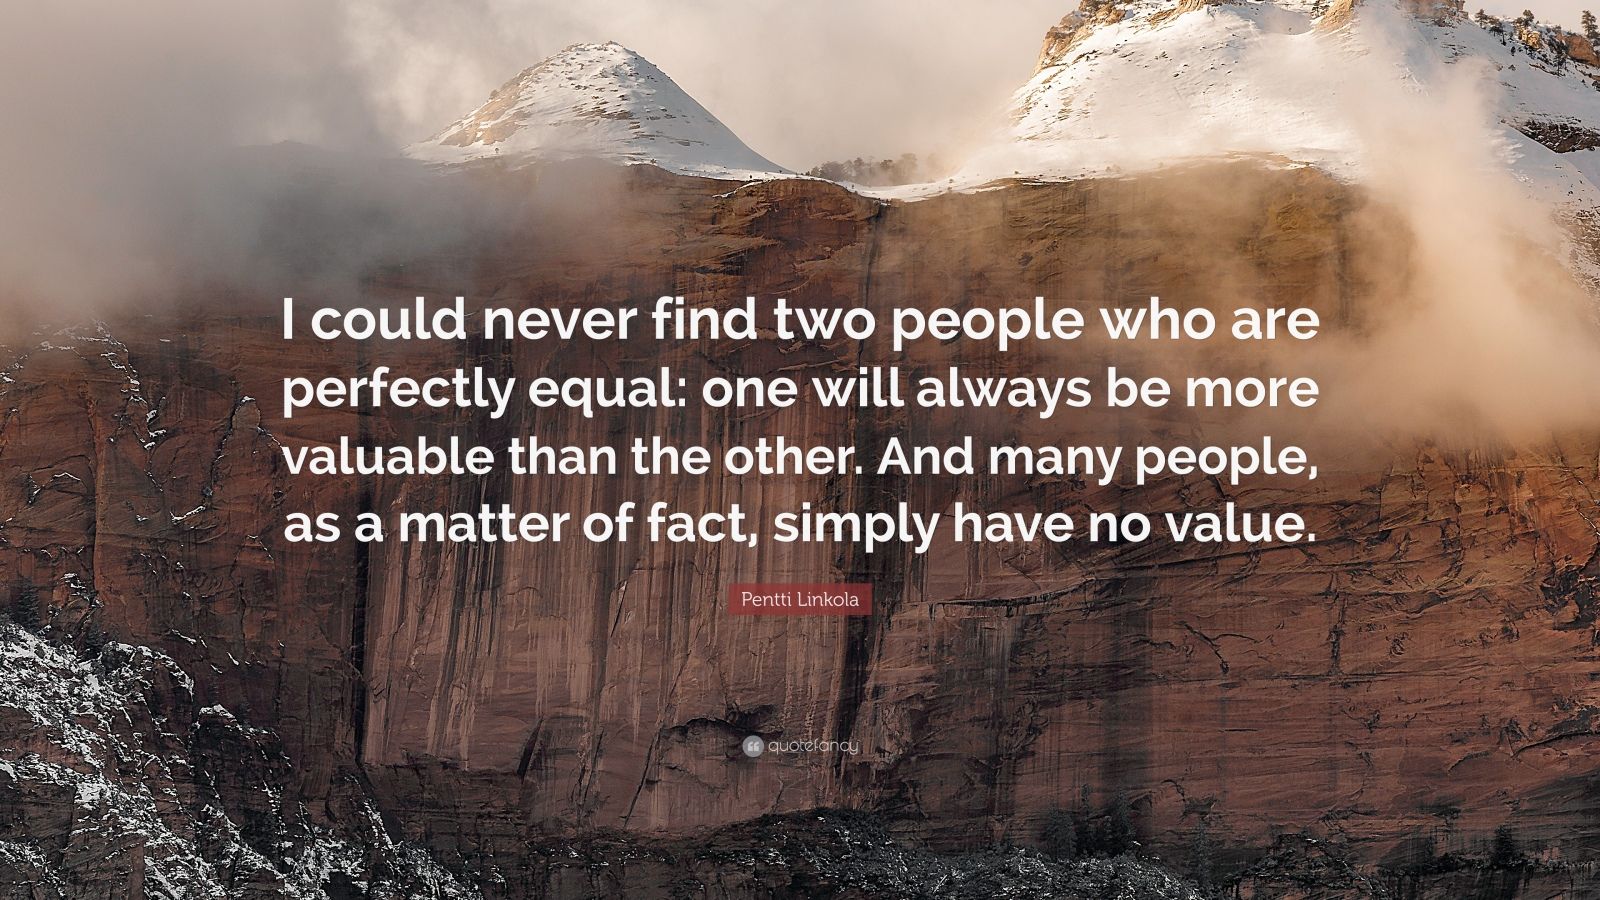 Pentti Linkola Quote: “I could never find two people who are perfectly ...